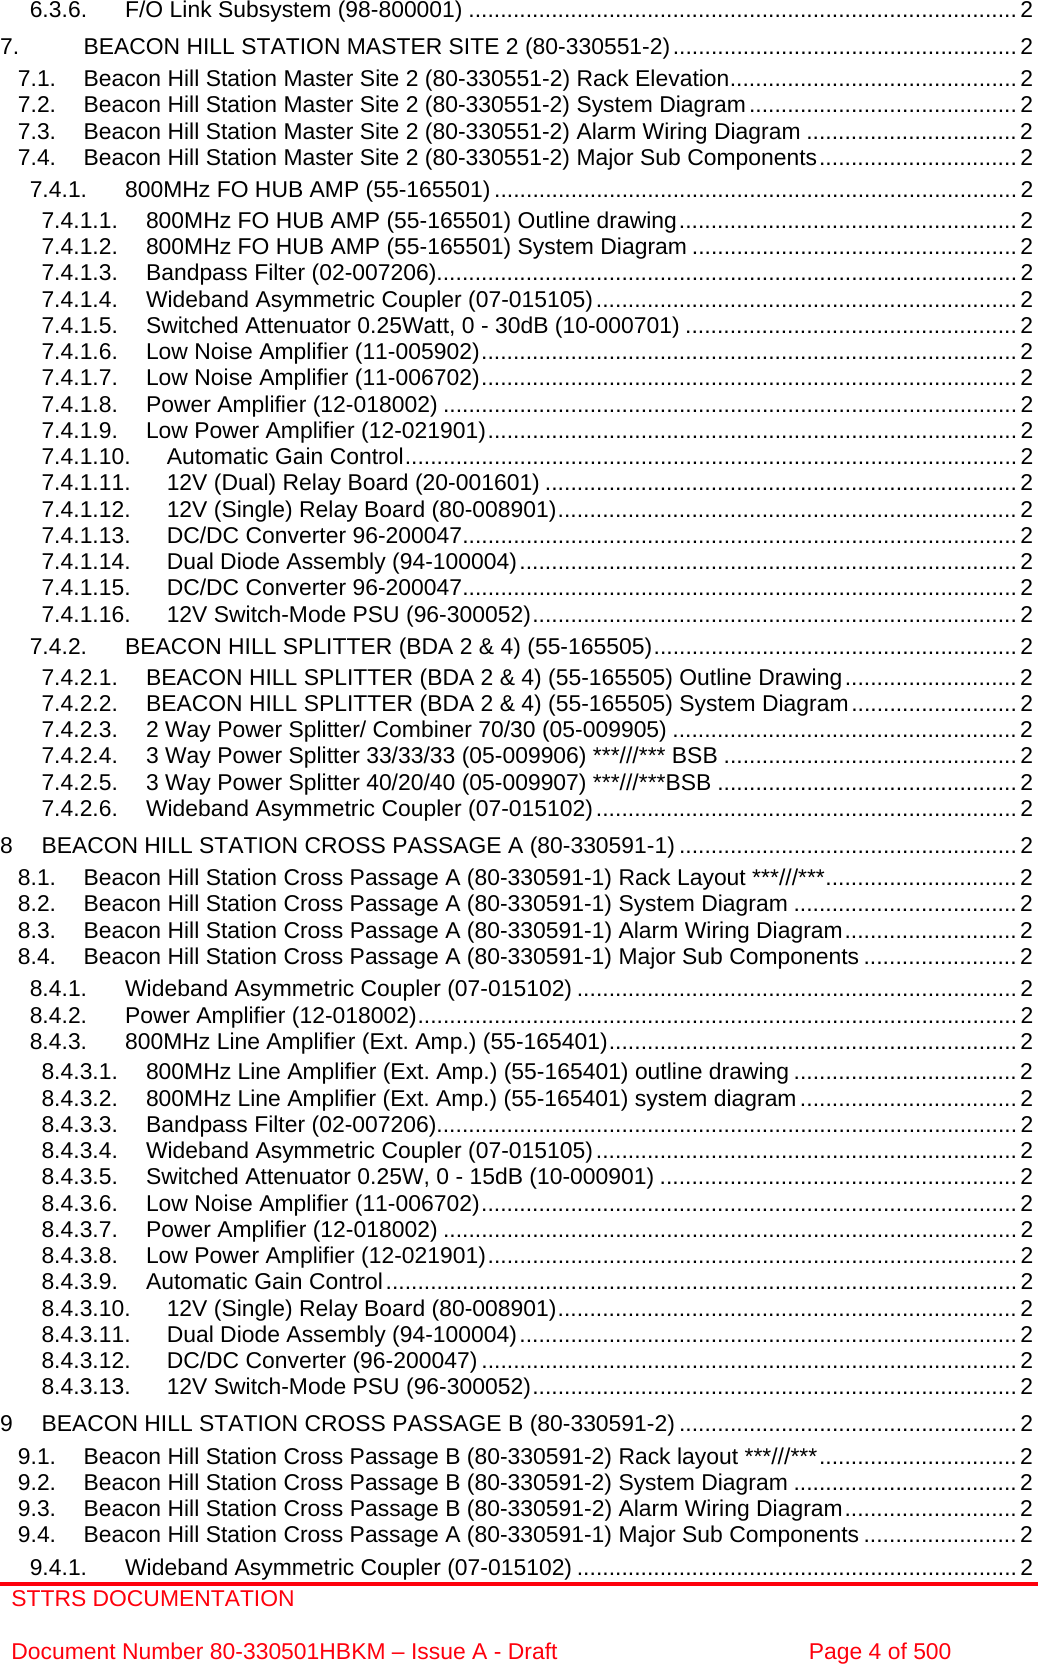 STTRS DOCUMENTATION  Document Number 80-330501HBKM – Issue A - Draft  Page 4 of 500  6.3.6. F/O Link Subsystem (98-800001) ......................................................................................2 7. BEACON HILL STATION MASTER SITE 2 (80-330551-2)......................................................2 7.1. Beacon Hill Station Master Site 2 (80-330551-2) Rack Elevation............................................. 2 7.2. Beacon Hill Station Master Site 2 (80-330551-2) System Diagram.......................................... 2 7.3. Beacon Hill Station Master Site 2 (80-330551-2) Alarm Wiring Diagram .................................2 7.4. Beacon Hill Station Master Site 2 (80-330551-2) Major Sub Components............................... 2 7.4.1. 800MHz FO HUB AMP (55-165501) .................................................................................. 2 7.4.1.1. 800MHz FO HUB AMP (55-165501) Outline drawing..................................................... 2 7.4.1.2. 800MHz FO HUB AMP (55-165501) System Diagram ...................................................2 7.4.1.3. Bandpass Filter (02-007206)...........................................................................................2 7.4.1.4. Wideband Asymmetric Coupler (07-015105).................................................................. 2 7.4.1.5. Switched Attenuator 0.25Watt, 0 - 30dB (10-000701) .................................................... 2 7.4.1.6. Low Noise Amplifier (11-005902).................................................................................... 2 7.4.1.7. Low Noise Amplifier (11-006702).................................................................................... 2 7.4.1.8. Power Amplifier (12-018002) .......................................................................................... 2 7.4.1.9. Low Power Amplifier (12-021901)...................................................................................2 7.4.1.10. Automatic Gain Control................................................................................................ 2 7.4.1.11. 12V (Dual) Relay Board (20-001601) ..........................................................................2 7.4.1.12. 12V (Single) Relay Board (80-008901)........................................................................ 2 7.4.1.13. DC/DC Converter 96-200047....................................................................................... 2 7.4.1.14. Dual Diode Assembly (94-100004)..............................................................................2 7.4.1.15. DC/DC Converter 96-200047....................................................................................... 2 7.4.1.16. 12V Switch-Mode PSU (96-300052)............................................................................ 2 7.4.2. BEACON HILL SPLITTER (BDA 2 &amp; 4) (55-165505)......................................................... 2 7.4.2.1. BEACON HILL SPLITTER (BDA 2 &amp; 4) (55-165505) Outline Drawing...........................2 7.4.2.2. BEACON HILL SPLITTER (BDA 2 &amp; 4) (55-165505) System Diagram..........................2 7.4.2.3. 2 Way Power Splitter/ Combiner 70/30 (05-009905) ...................................................... 2 7.4.2.4. 3 Way Power Splitter 33/33/33 (05-009906) ***///*** BSB ..............................................2 7.4.2.5. 3 Way Power Splitter 40/20/40 (05-009907) ***///***BSB ...............................................2 7.4.2.6. Wideband Asymmetric Coupler (07-015102).................................................................. 2 8 BEACON HILL STATION CROSS PASSAGE A (80-330591-1) .....................................................2 8.1. Beacon Hill Station Cross Passage A (80-330591-1) Rack Layout ***///***..............................2 8.2. Beacon Hill Station Cross Passage A (80-330591-1) System Diagram ...................................2 8.3. Beacon Hill Station Cross Passage A (80-330591-1) Alarm Wiring Diagram...........................2 8.4. Beacon Hill Station Cross Passage A (80-330591-1) Major Sub Components ........................ 2 8.4.1. Wideband Asymmetric Coupler (07-015102) ..................................................................... 2 8.4.2. Power Amplifier (12-018002)..............................................................................................2 8.4.3. 800MHz Line Amplifier (Ext. Amp.) (55-165401)................................................................ 2 8.4.3.1. 800MHz Line Amplifier (Ext. Amp.) (55-165401) outline drawing ................................... 2 8.4.3.2. 800MHz Line Amplifier (Ext. Amp.) (55-165401) system diagram..................................2 8.4.3.3. Bandpass Filter (02-007206)...........................................................................................2 8.4.3.4. Wideband Asymmetric Coupler (07-015105).................................................................. 2 8.4.3.5. Switched Attenuator 0.25W, 0 - 15dB (10-000901) ........................................................ 2 8.4.3.6. Low Noise Amplifier (11-006702).................................................................................... 2 8.4.3.7. Power Amplifier (12-018002) .......................................................................................... 2 8.4.3.8. Low Power Amplifier (12-021901)...................................................................................2 8.4.3.9. Automatic Gain Control...................................................................................................2 8.4.3.10. 12V (Single) Relay Board (80-008901)........................................................................ 2 8.4.3.11. Dual Diode Assembly (94-100004)..............................................................................2 8.4.3.12. DC/DC Converter (96-200047) ....................................................................................2 8.4.3.13. 12V Switch-Mode PSU (96-300052)............................................................................ 2 9 BEACON HILL STATION CROSS PASSAGE B (80-330591-2) .....................................................2 9.1. Beacon Hill Station Cross Passage B (80-330591-2) Rack layout ***///***...............................2 9.2. Beacon Hill Station Cross Passage B (80-330591-2) System Diagram ...................................2 9.3. Beacon Hill Station Cross Passage B (80-330591-2) Alarm Wiring Diagram...........................2 9.4. Beacon Hill Station Cross Passage A (80-330591-1) Major Sub Components ........................ 2 9.4.1. Wideband Asymmetric Coupler (07-015102) ..................................................................... 2 